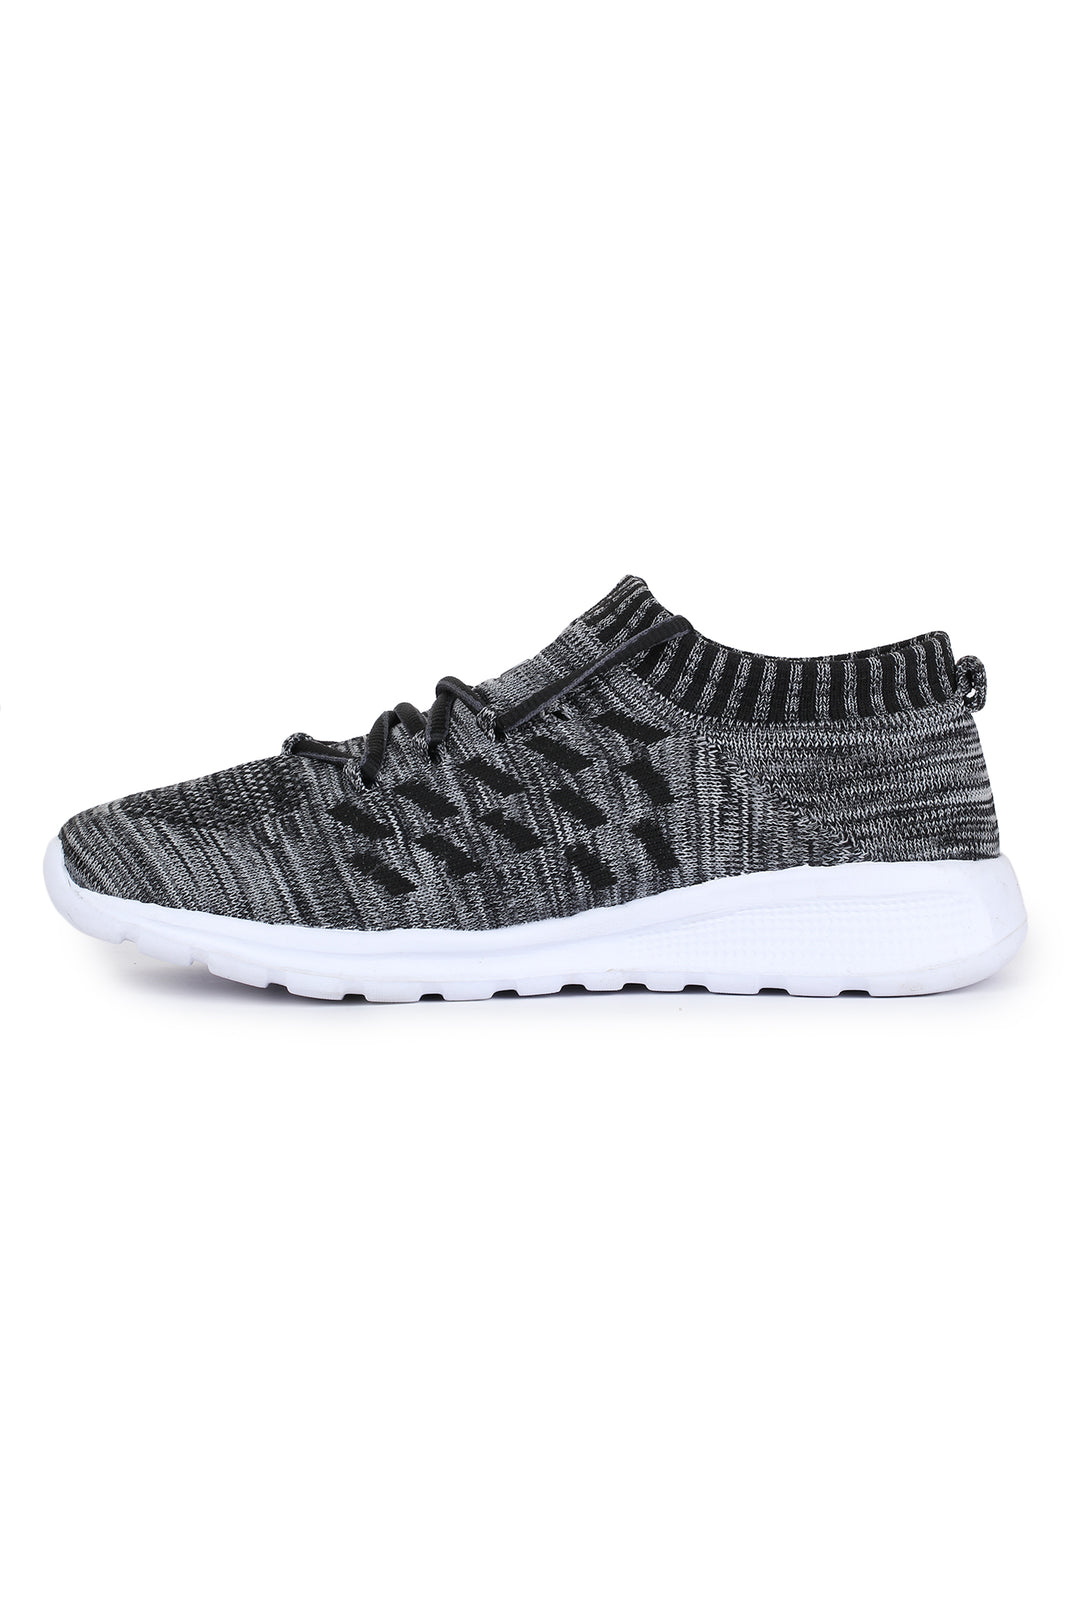 Grey Solid Mesh Lace Up Running Sport Shoes For Men